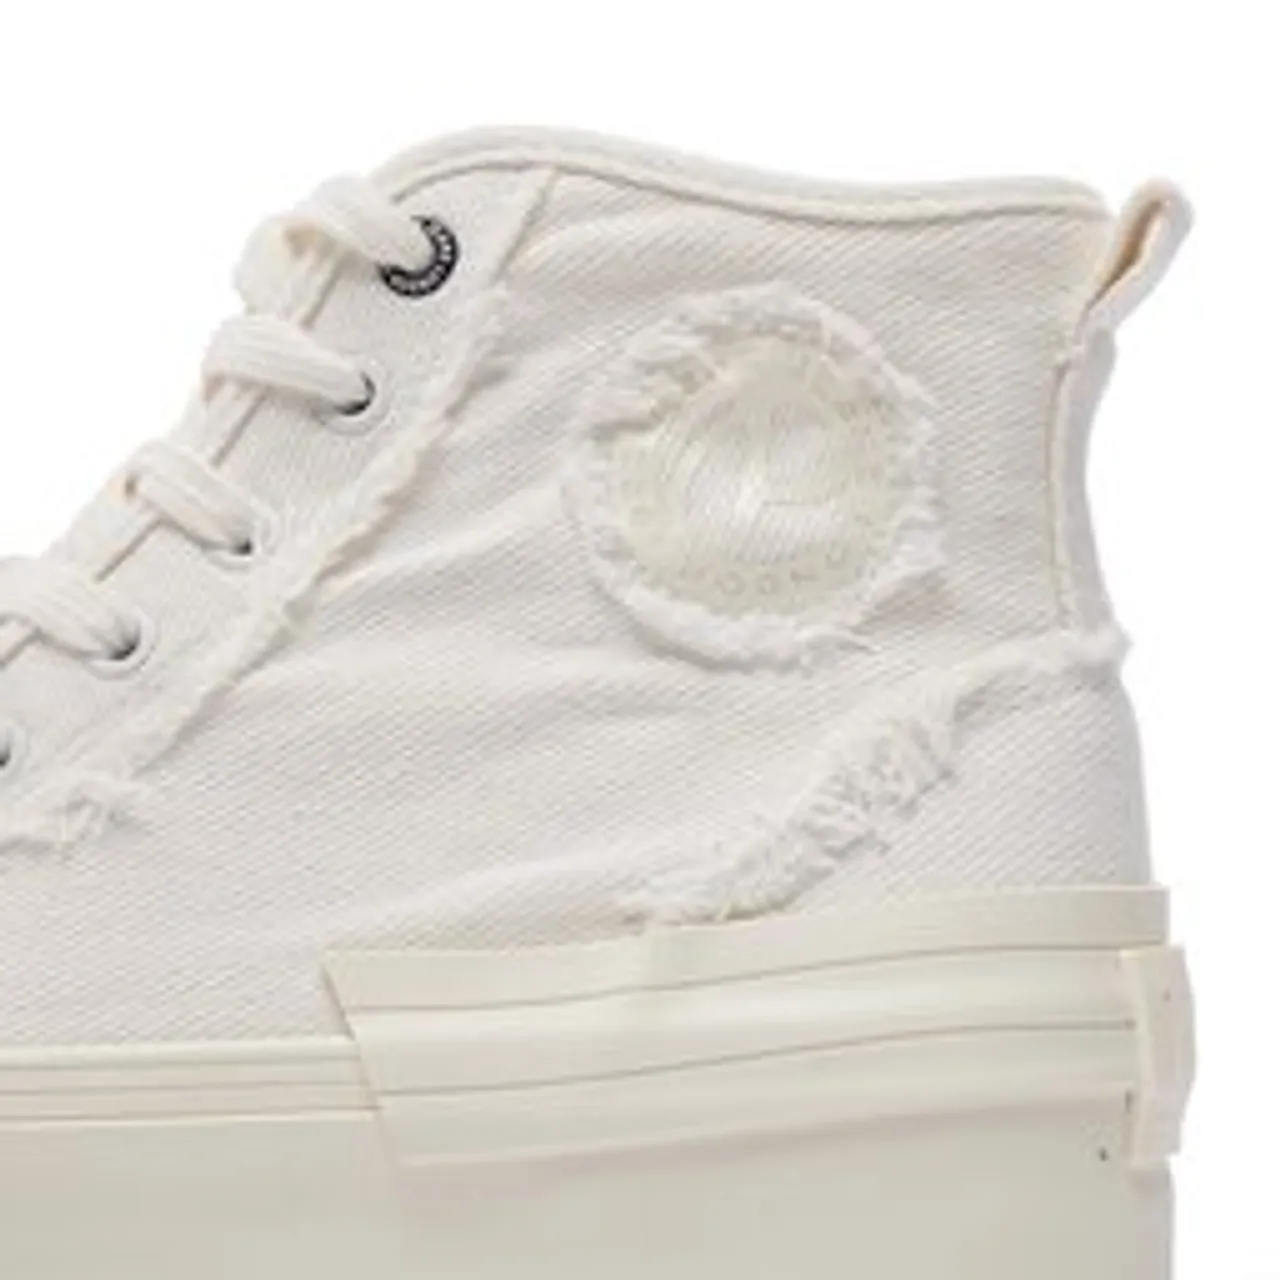 Sneakers aus Stoff Pepe Jeans Samoi Soft PLS31553 Off White 803